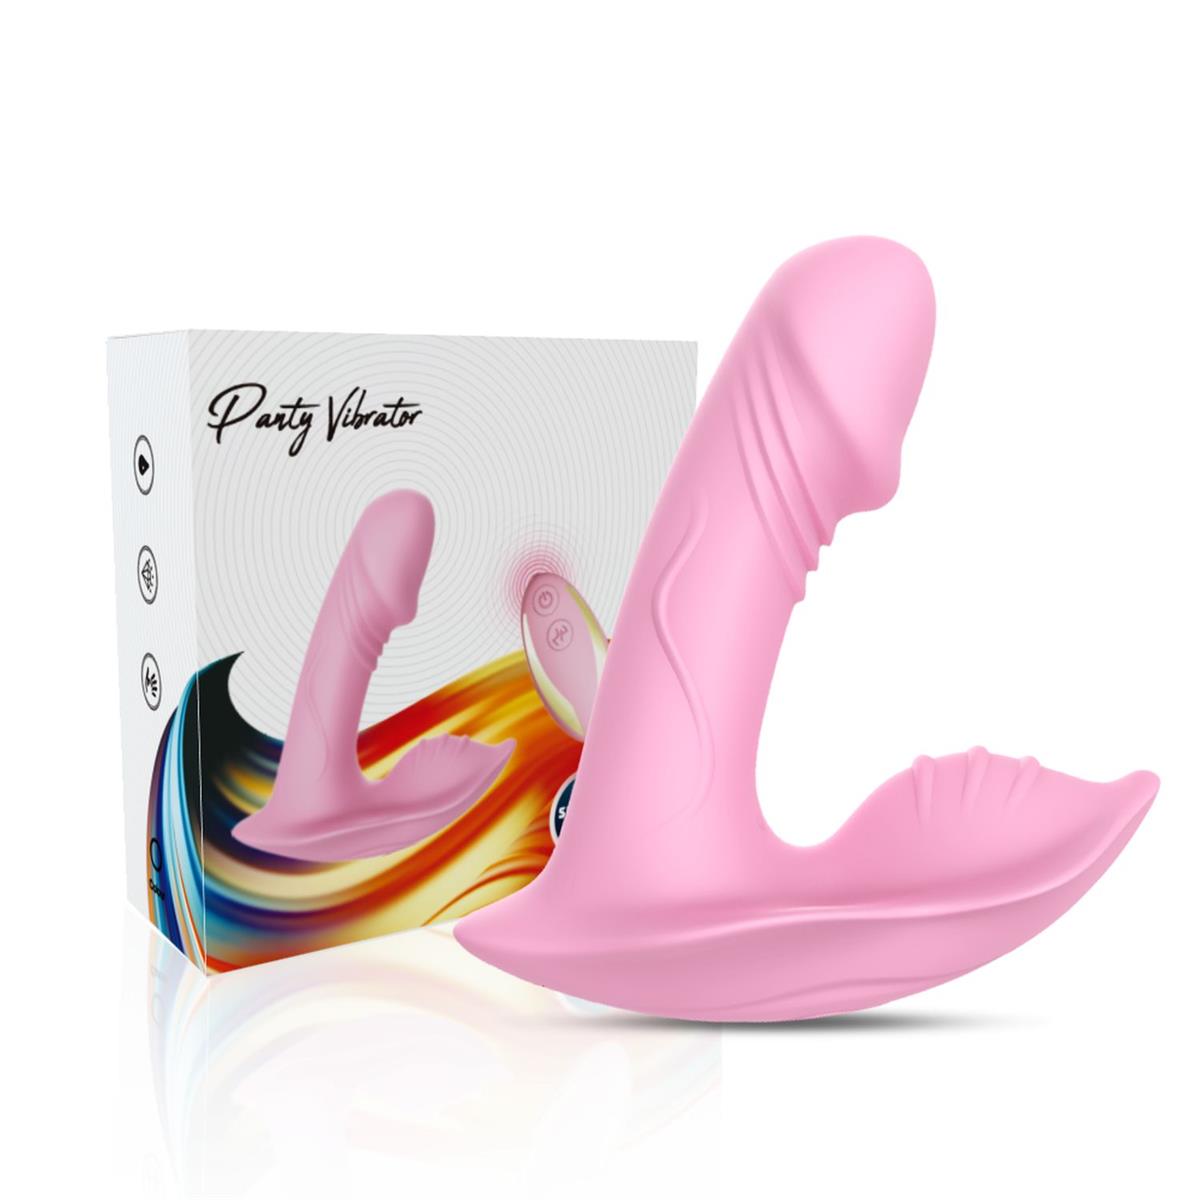 Bossoftoys - 52-00032 - Remote control  Panty vibrator - Clit stimulation function - 10 Function - Rechargeable  - Luxury Giftbox - Pink